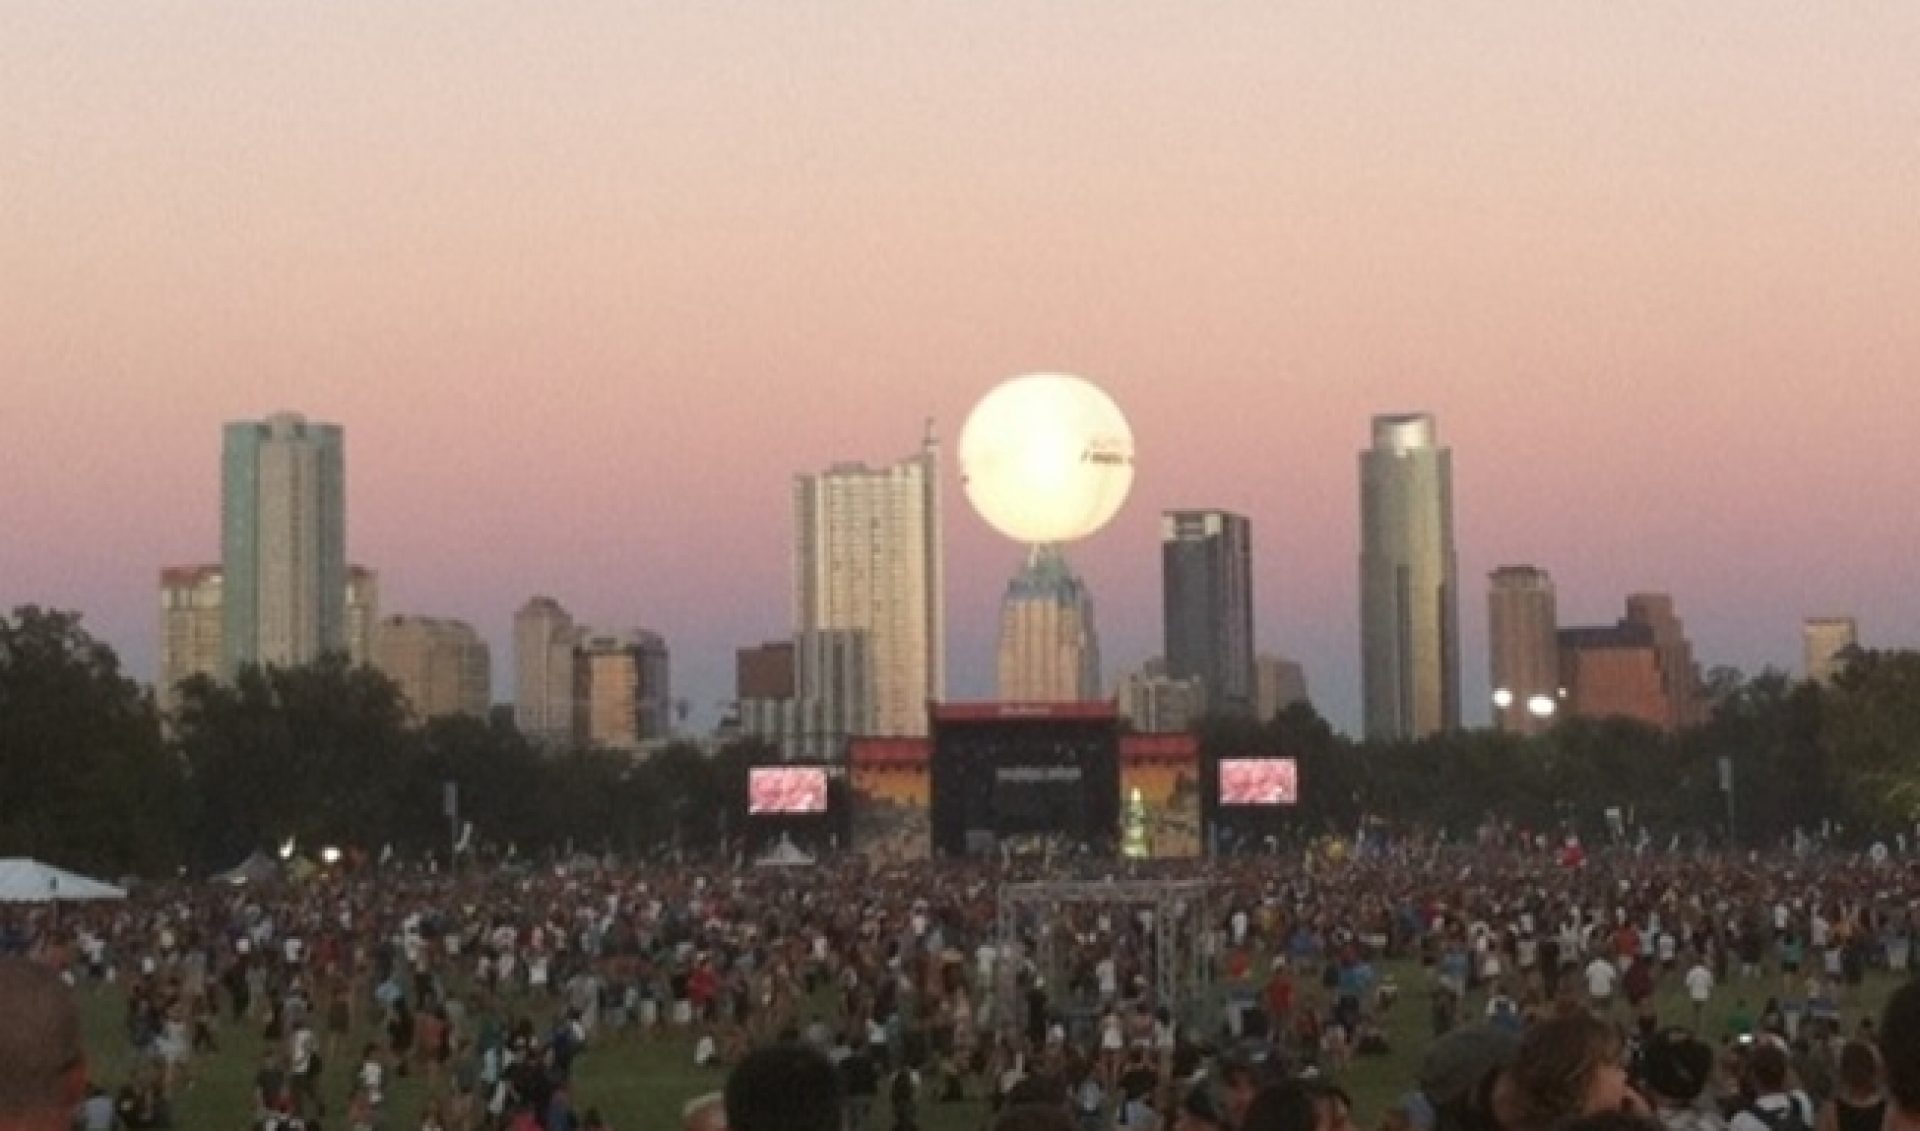 YouTube Live Stream Of Austin City Limits Festival Going On Right Now